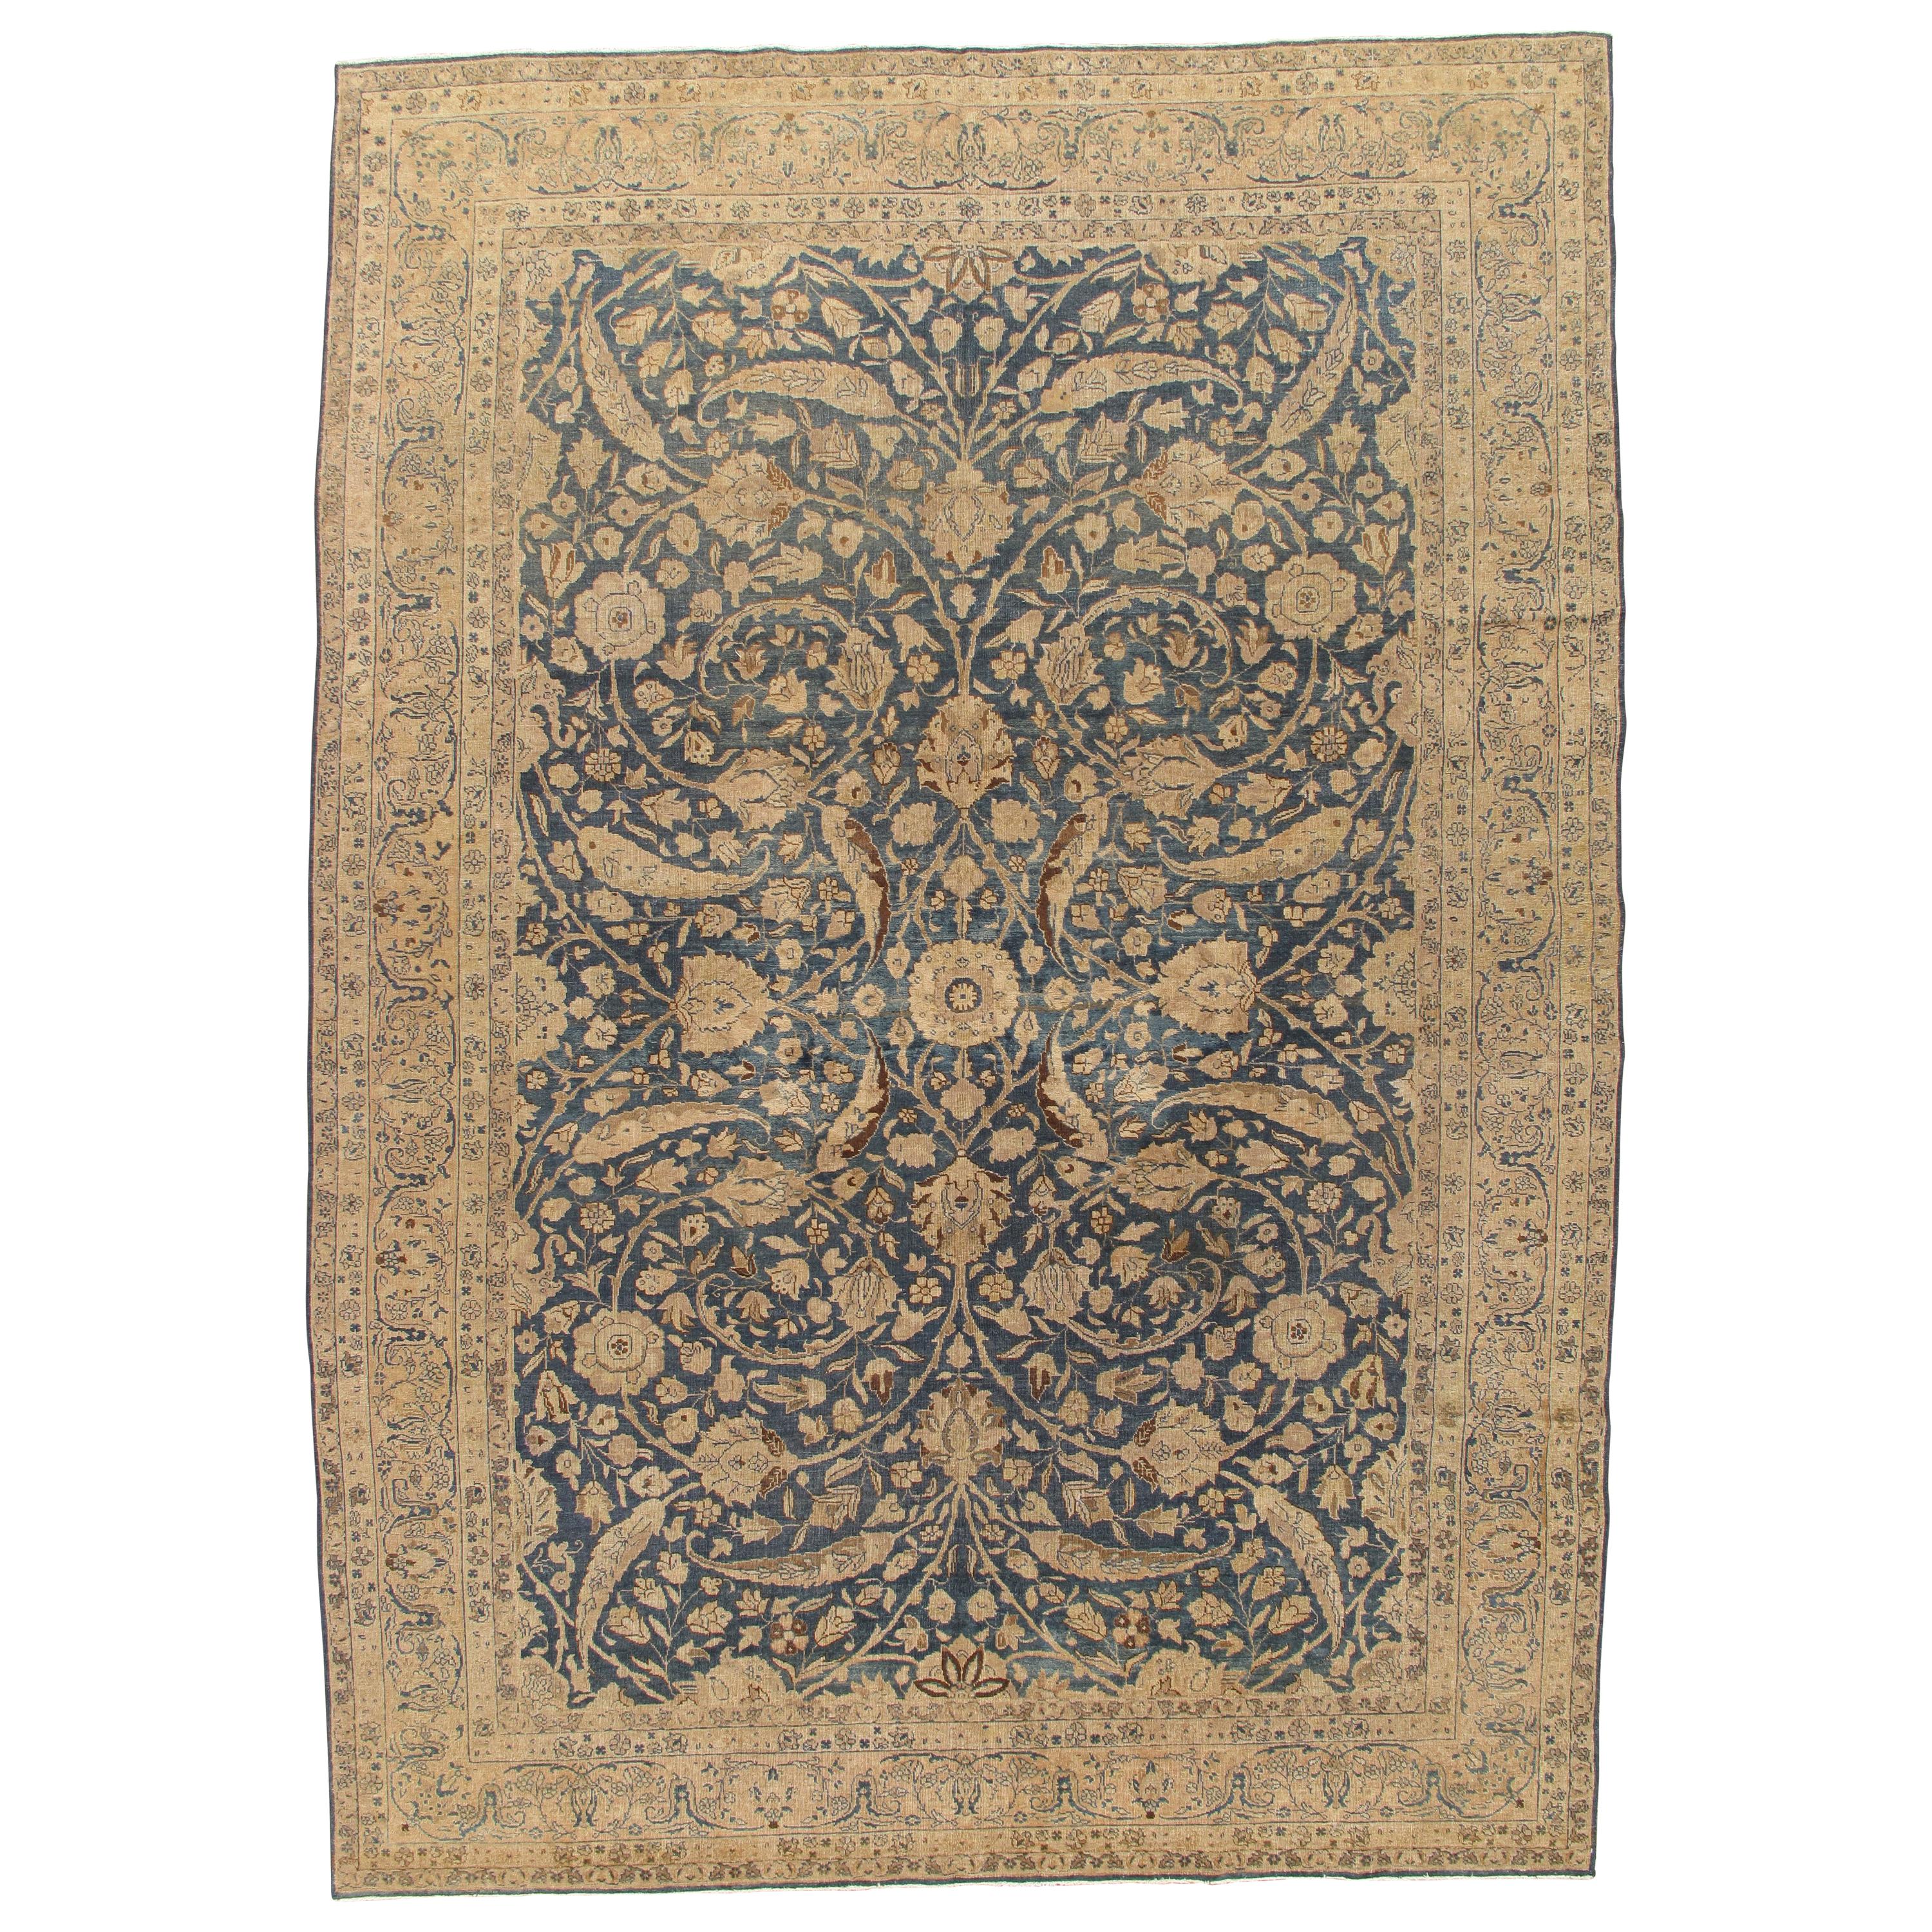 Antique Tabriz Carpet, Handmade Persian Rug in Floral Gold, Blue and Taupe